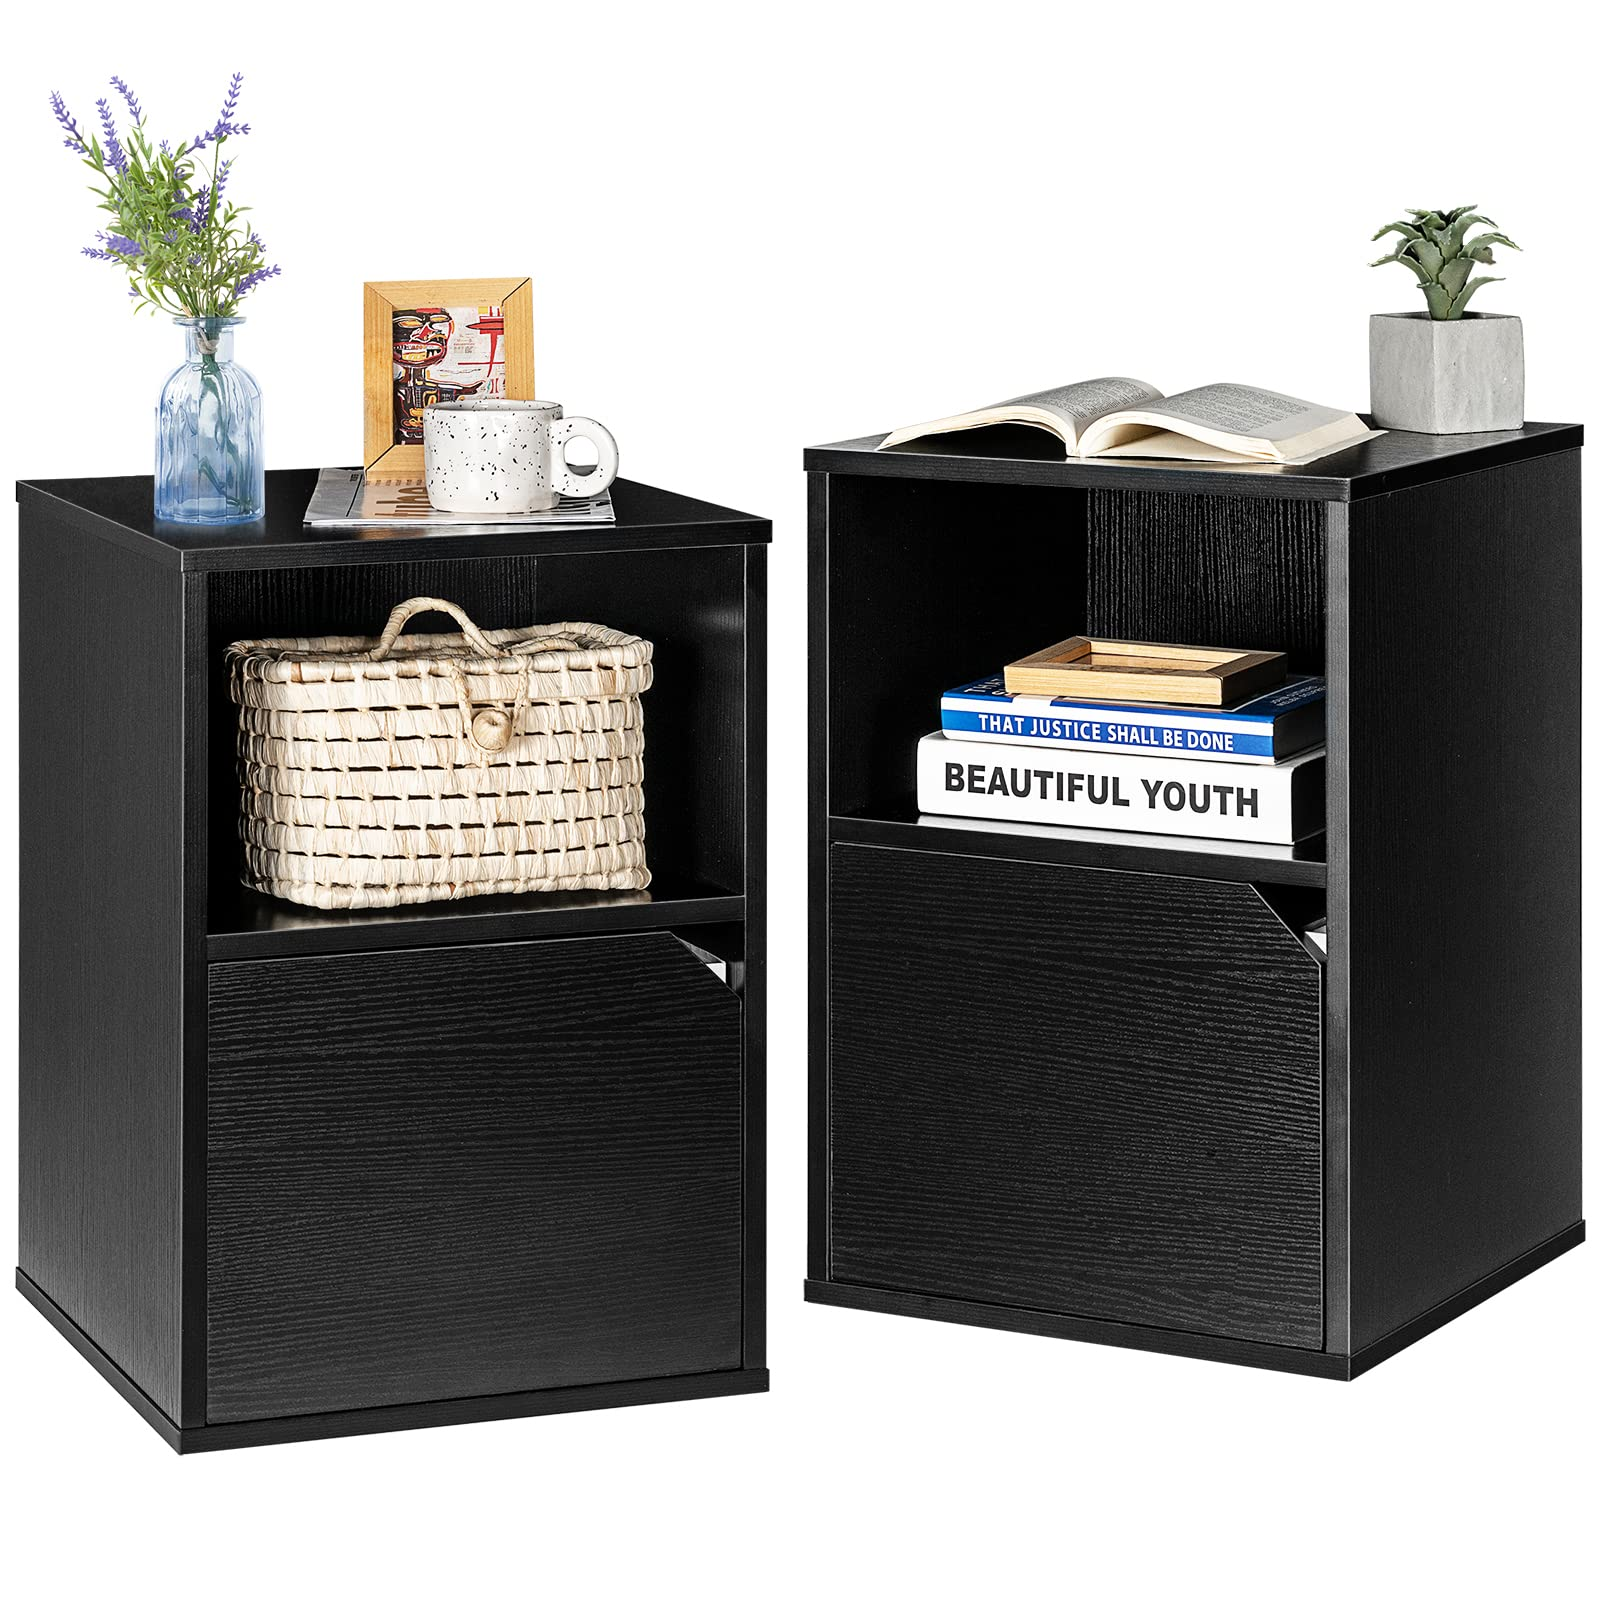 Giantex Set of 2 Nightstands, End Table Bedside Table w/Storage Cabinet and Open Shelf